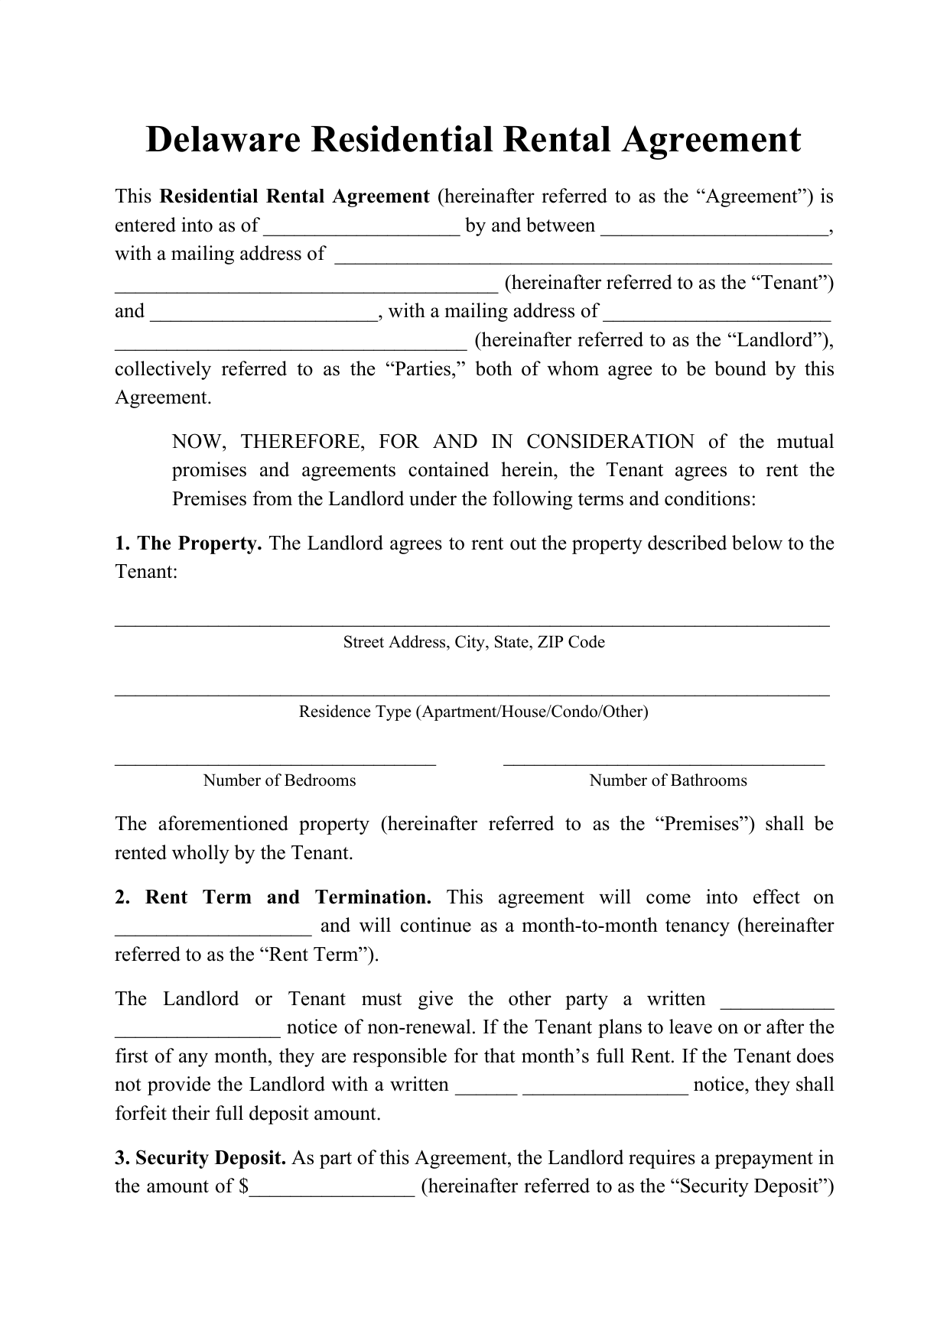 Residential Rental Agreement Template - Delaware, Page 1